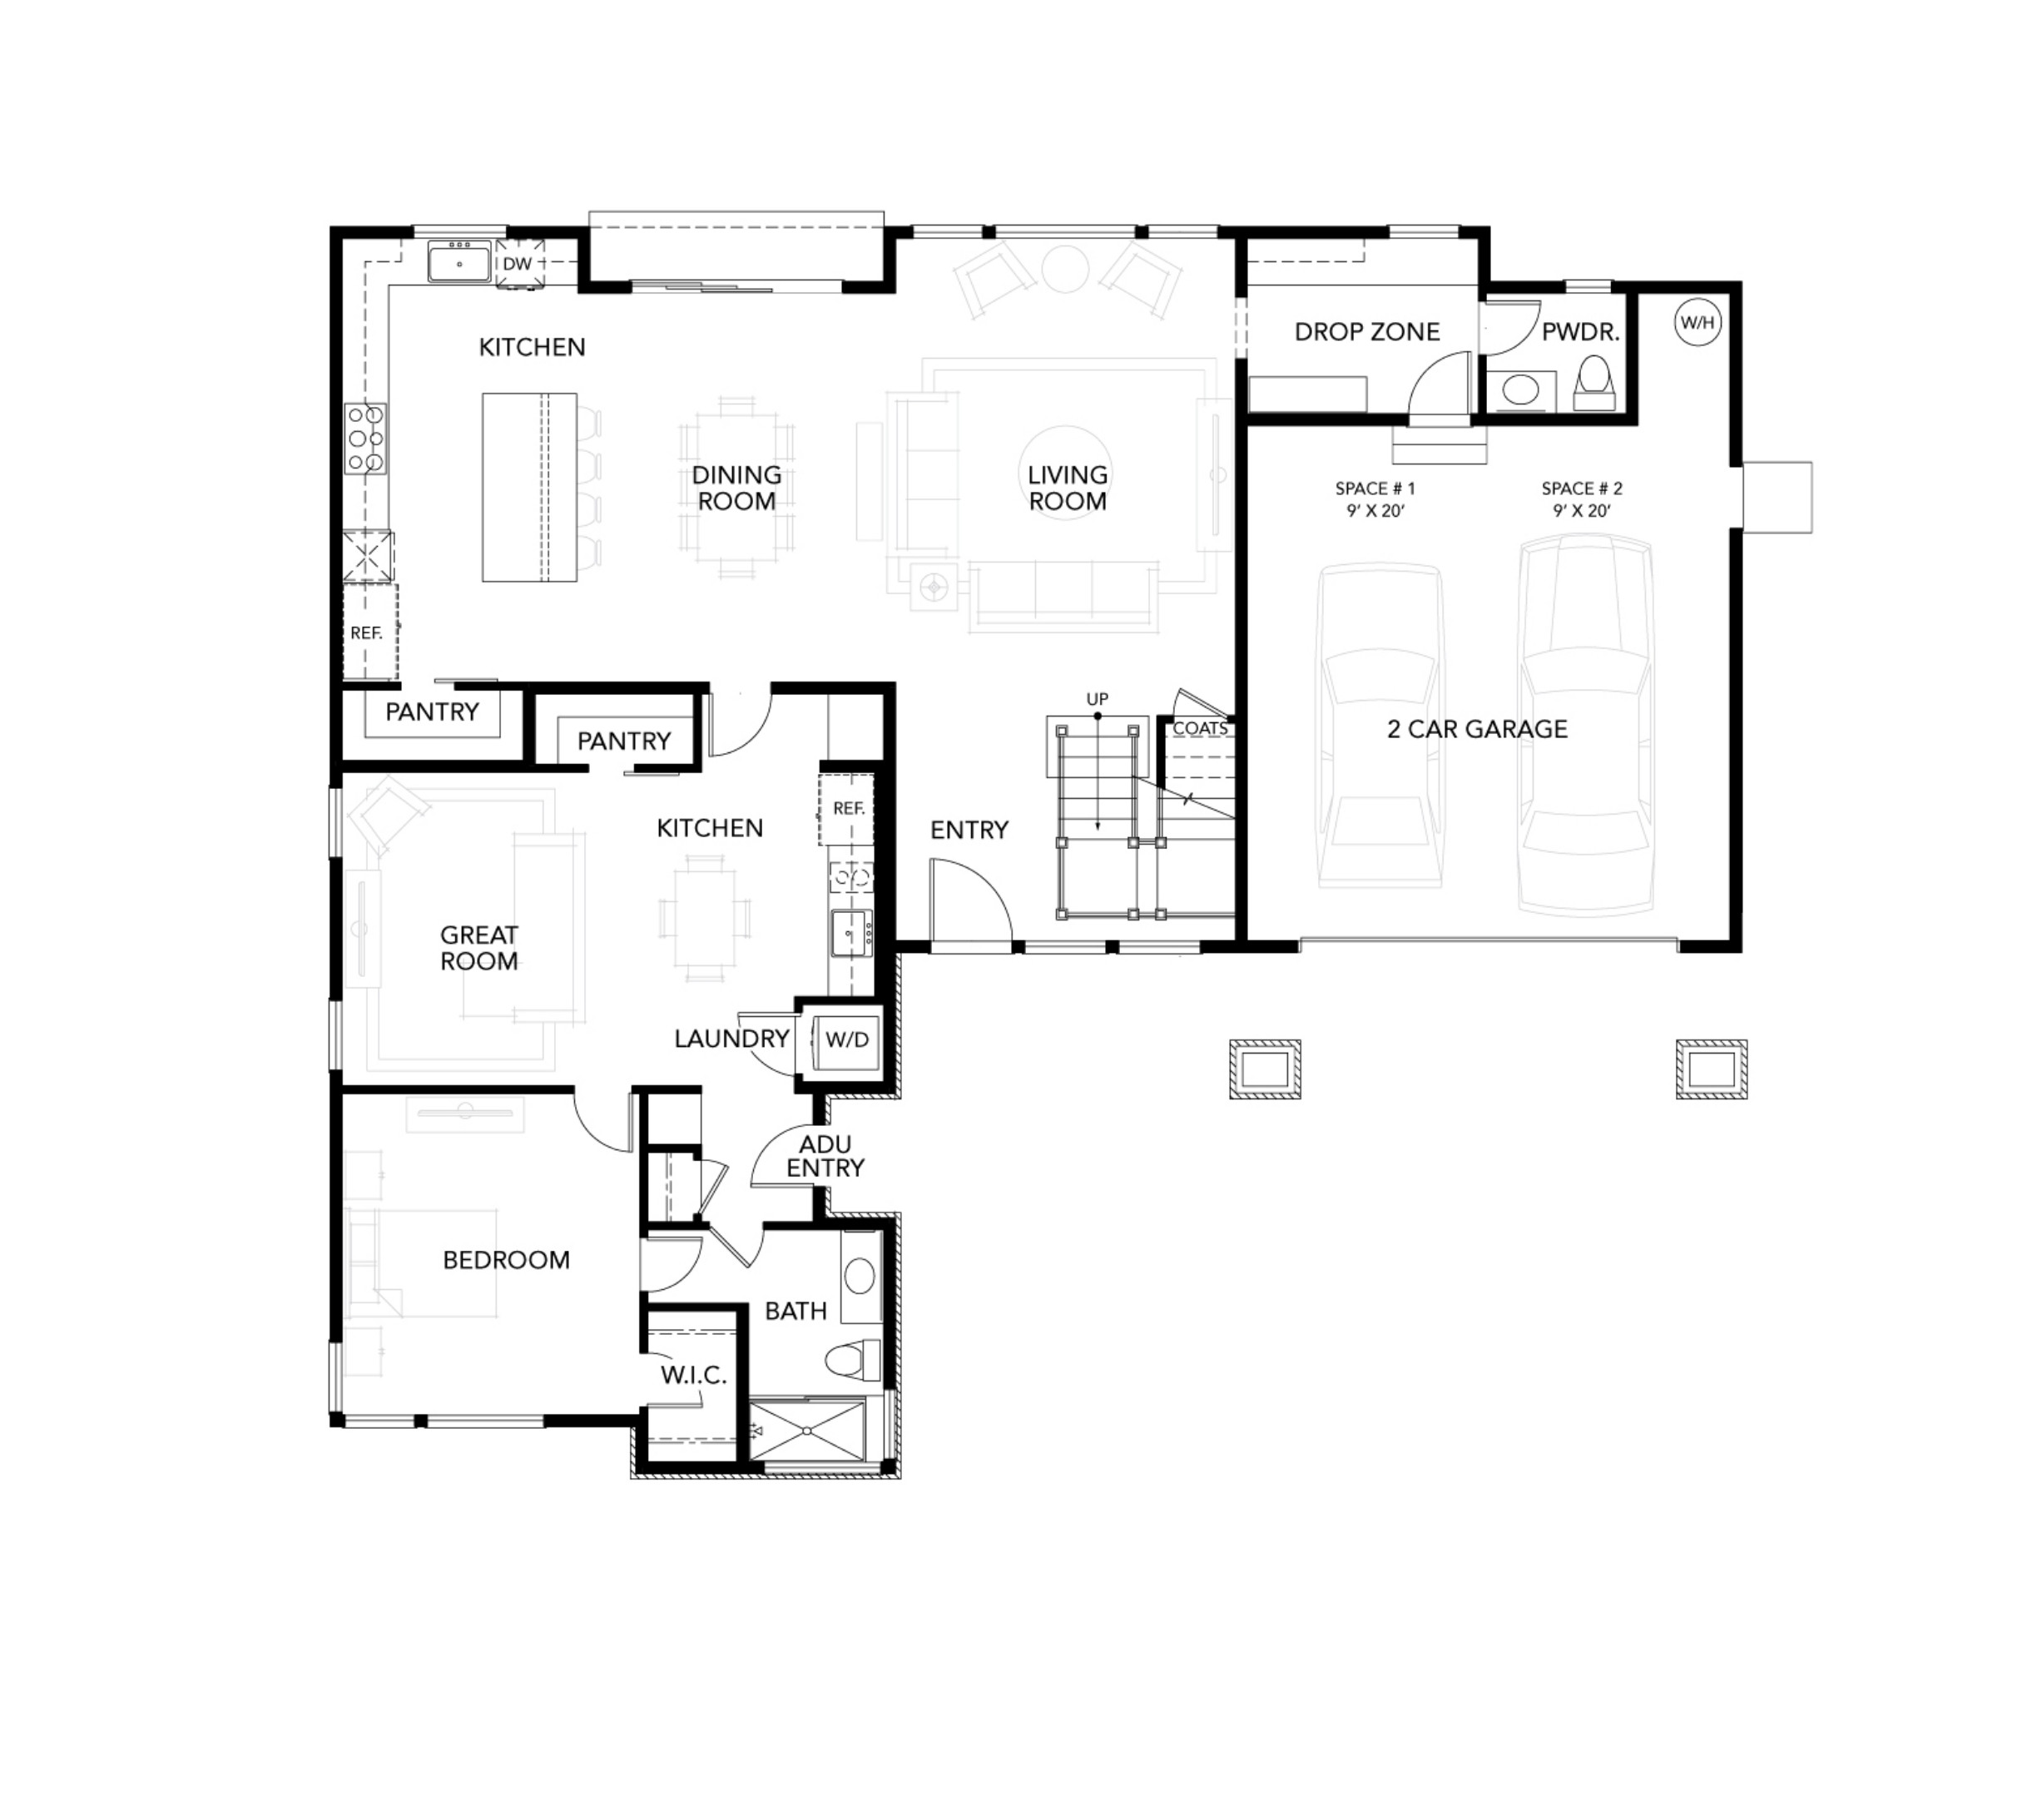 Haven Development's second floor Plan for elevation 2A of the Legacy at Lucas Valley new home development in Marin County, CA